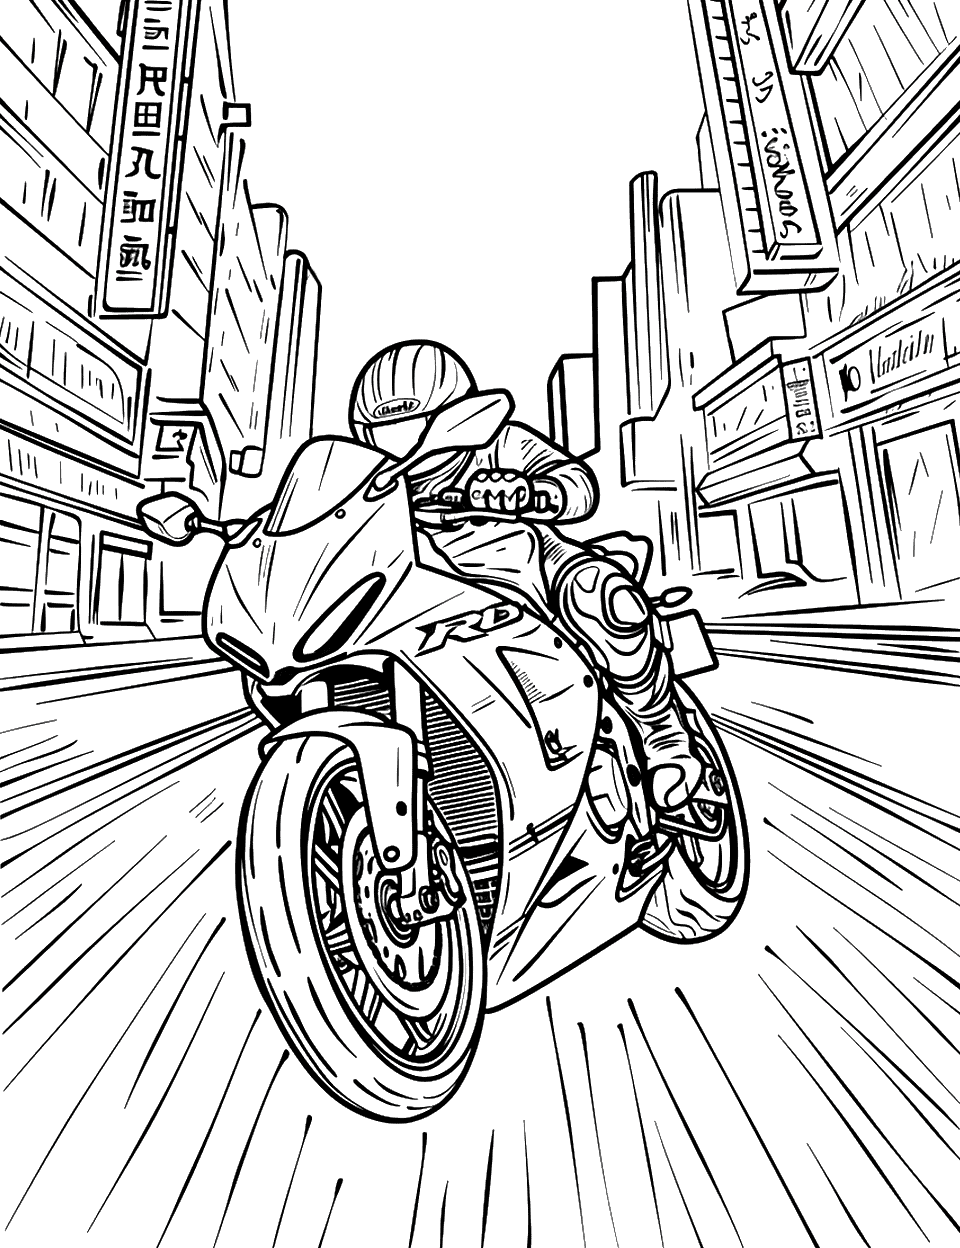 Motorcycle Race Through City Coloring Page - Motorcycle racing through a city street with buildings in the background.